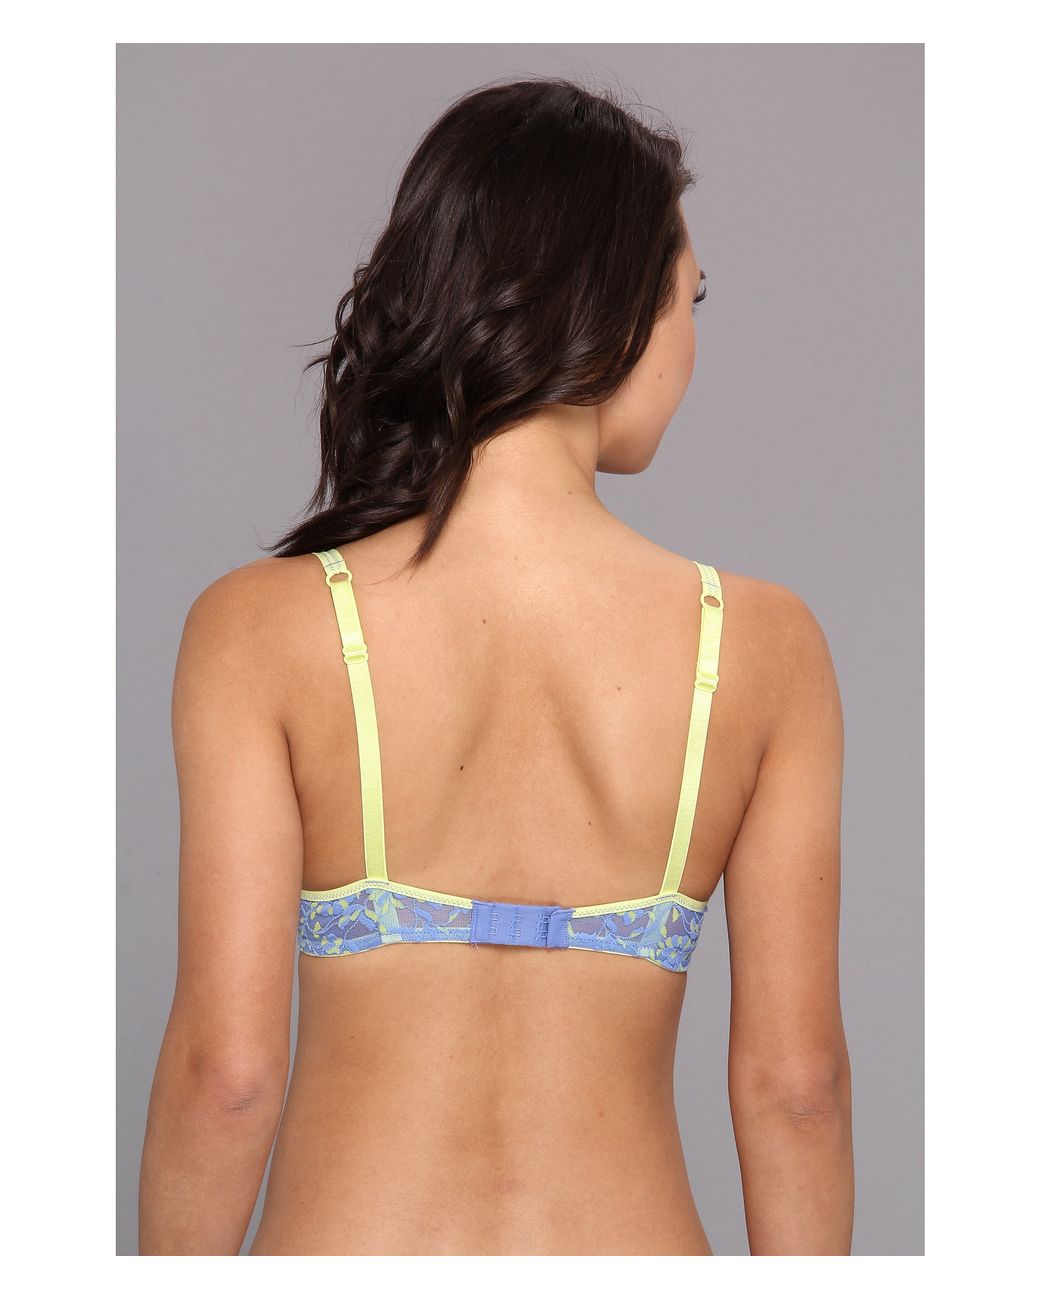 DKNY Intimates Women's Classic Lace Unlined Demi Rosewater 32B